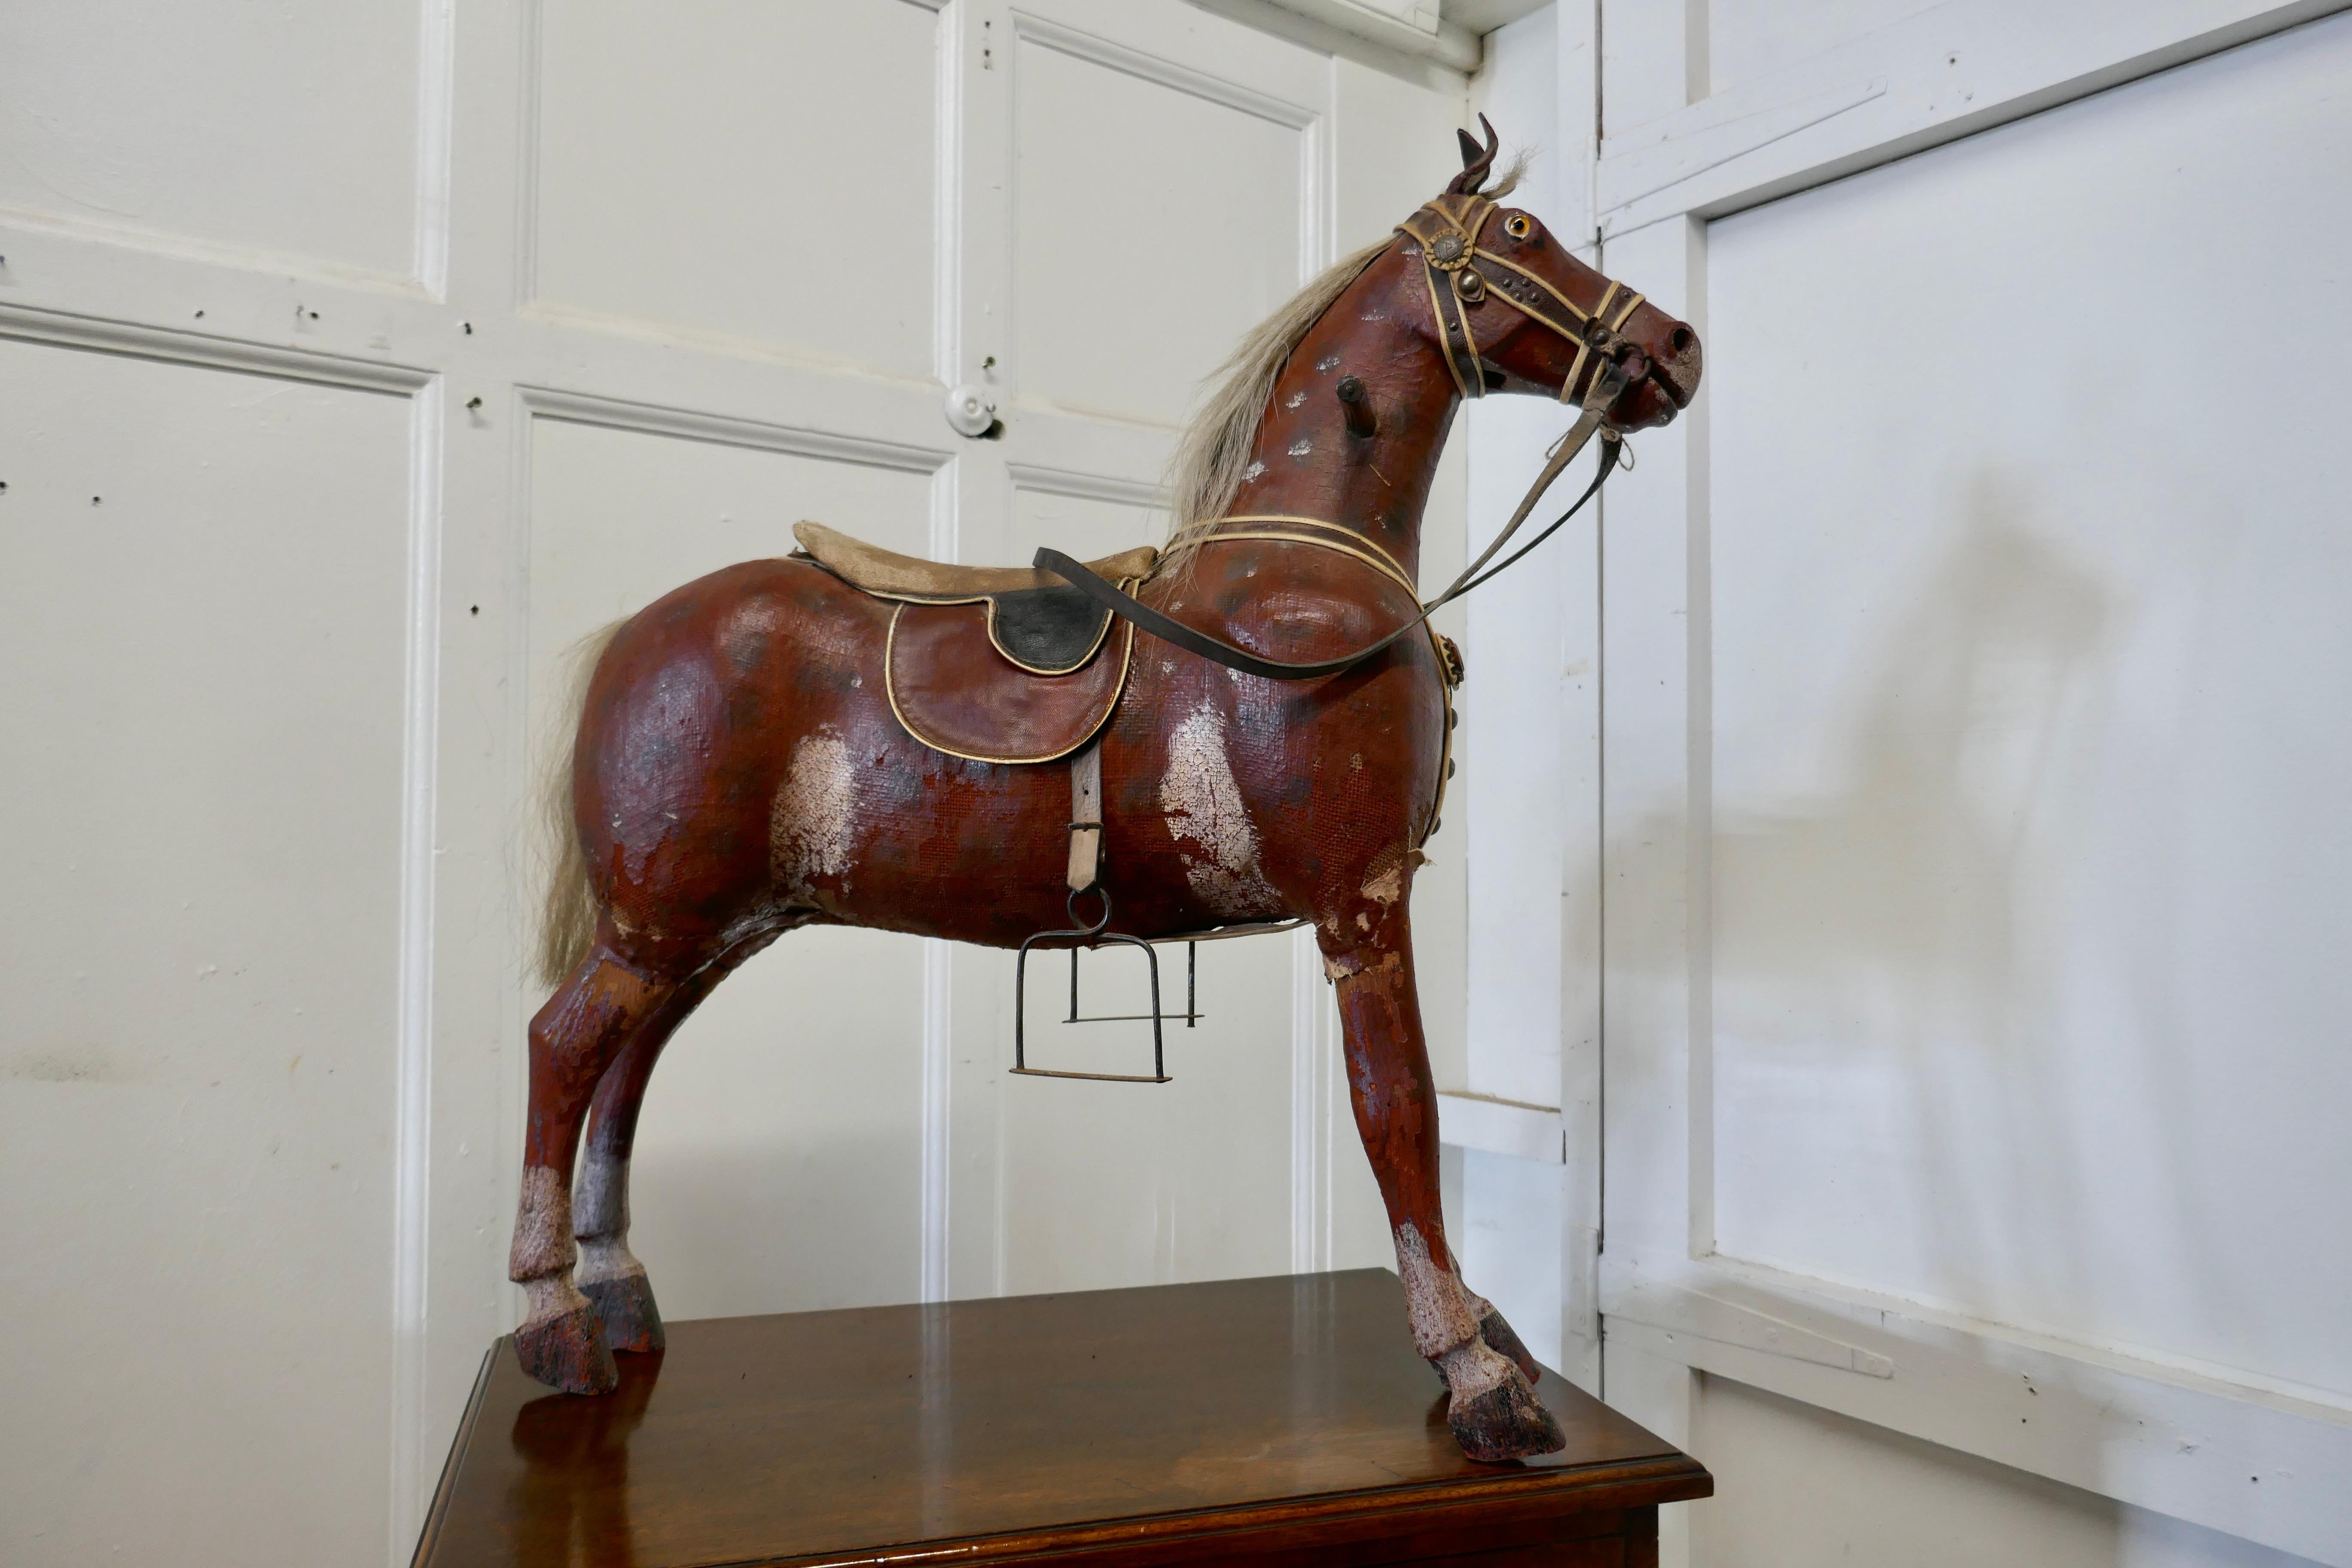 Arts & Crafts Canvas Toy Model of a Horse

This hansom beast is free standing and would very likely have been originally bought for a children’s room
The condition is entirely original and unrestored, so he has a little distressing on his canvas